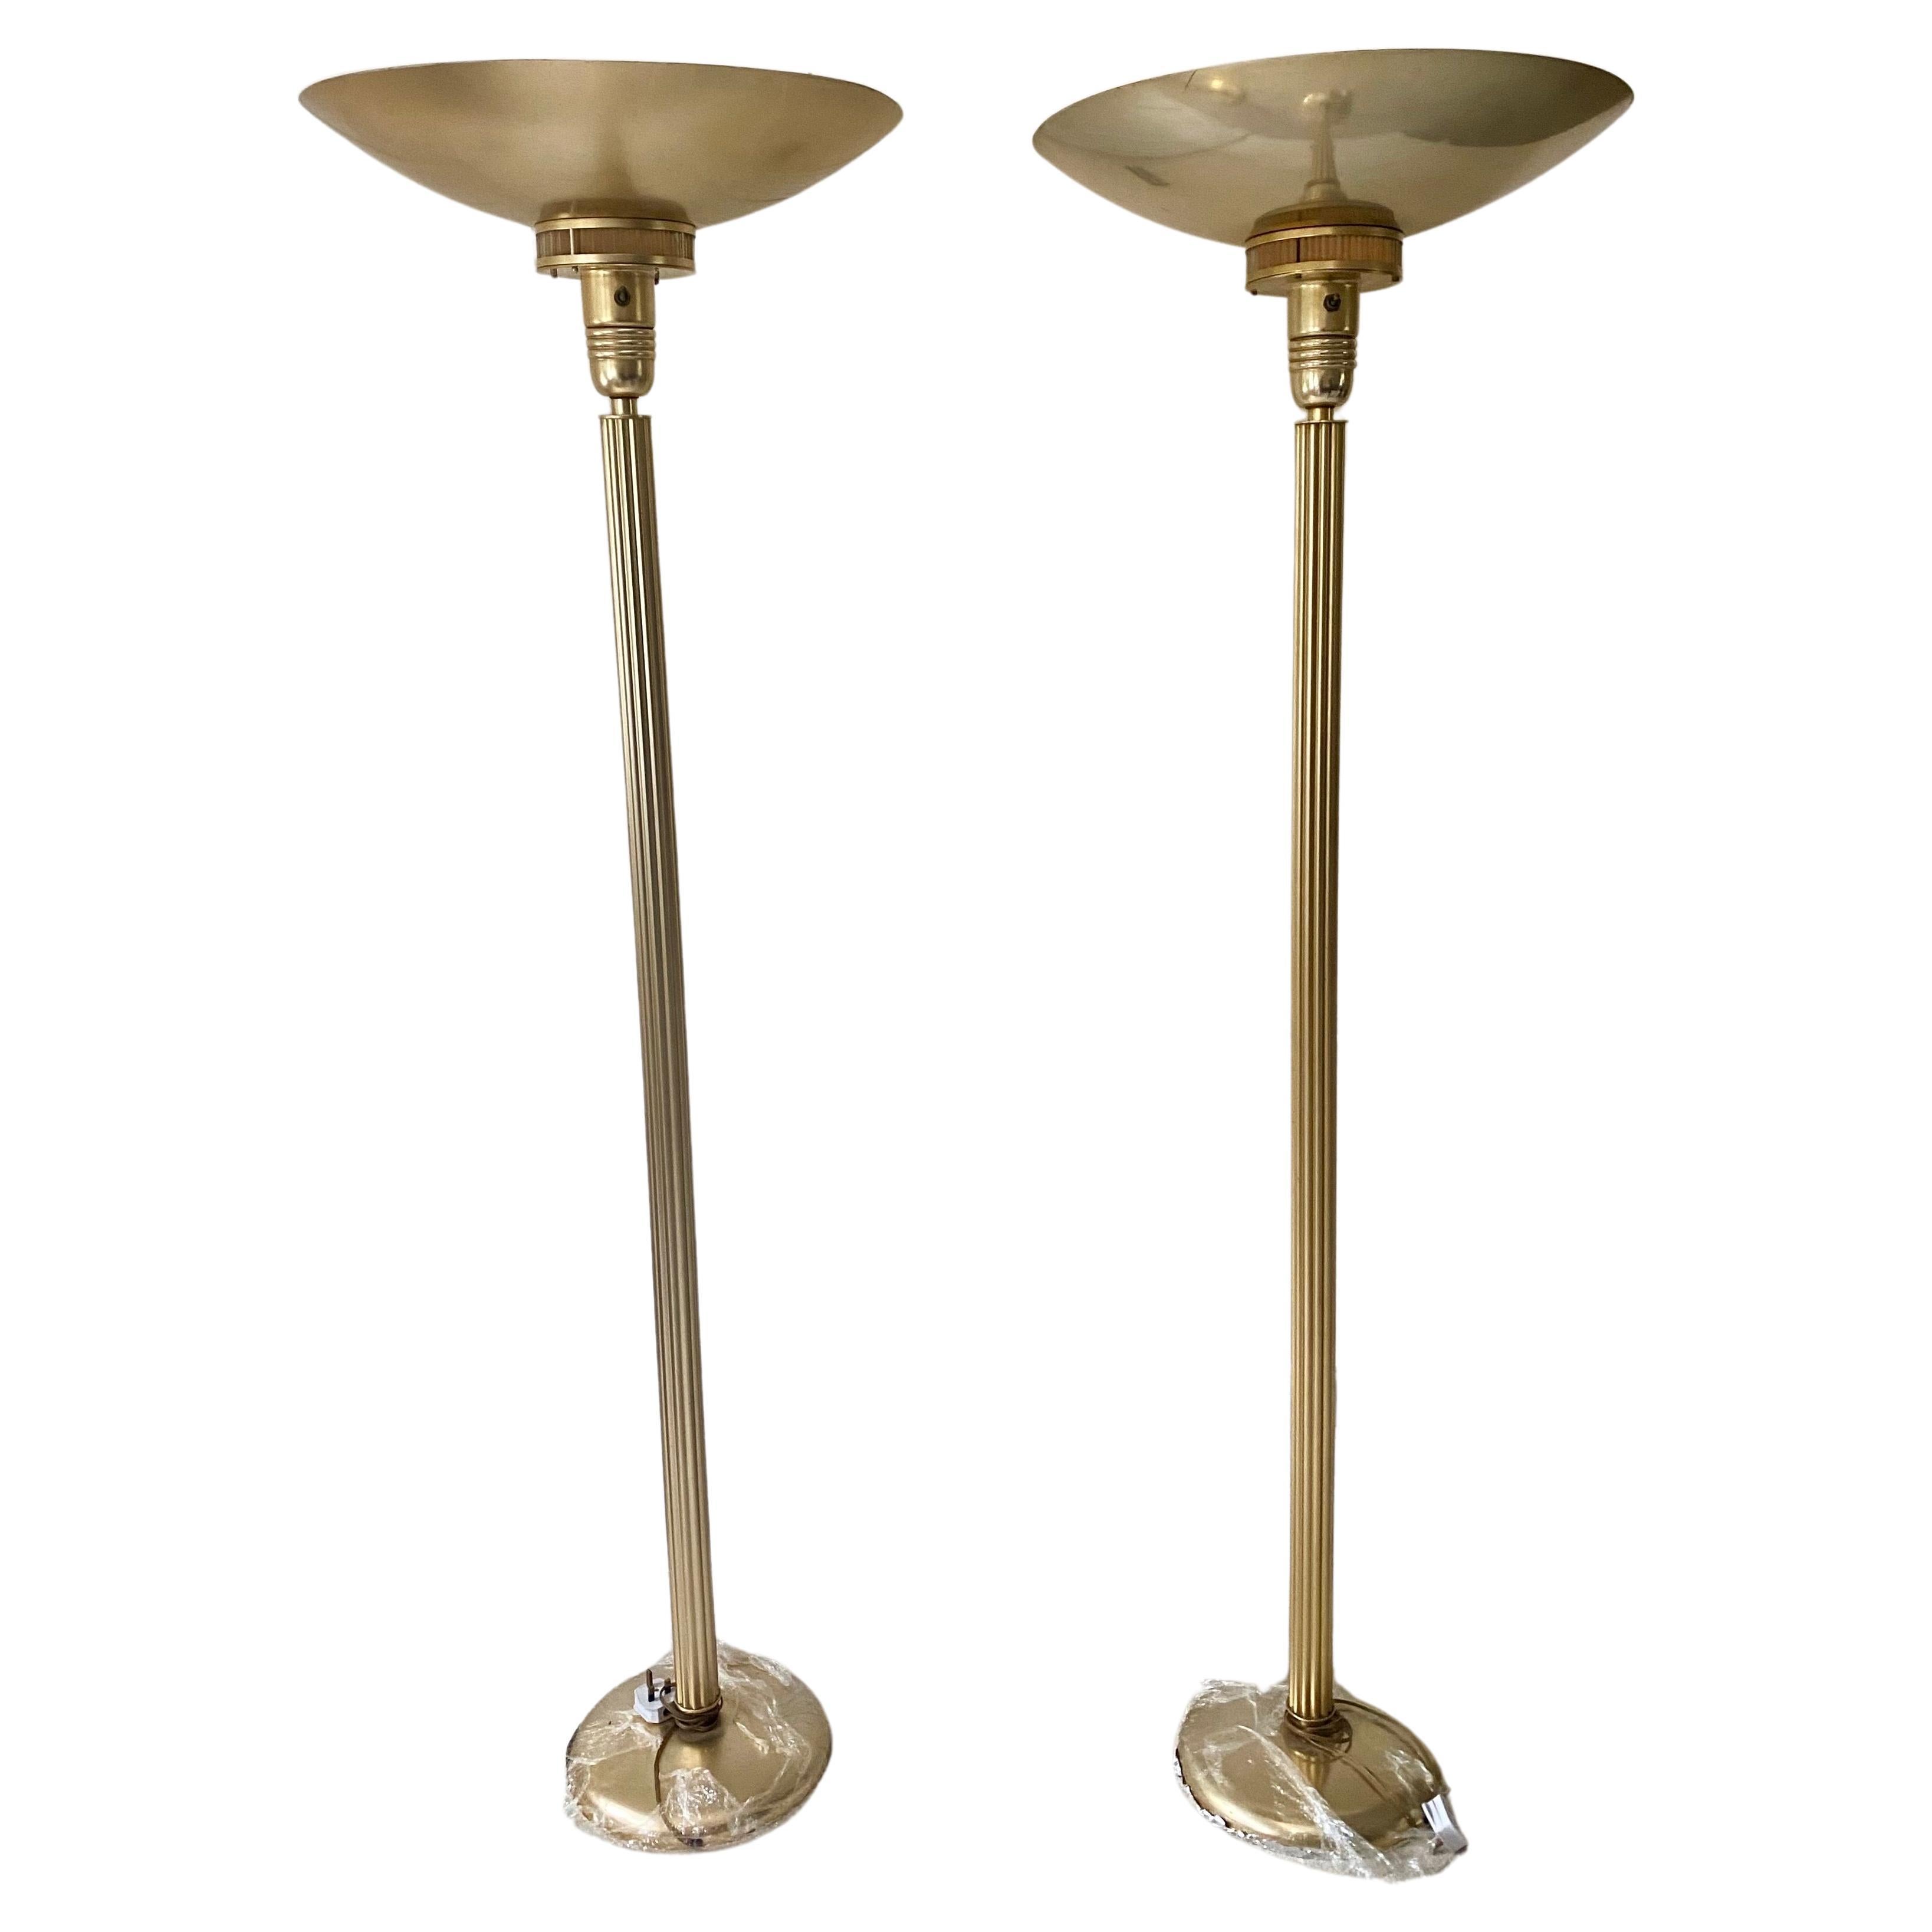 A Pair of Art Deco Floor Lamps Large Dish Uplighters Circa 1920's Torchiers 